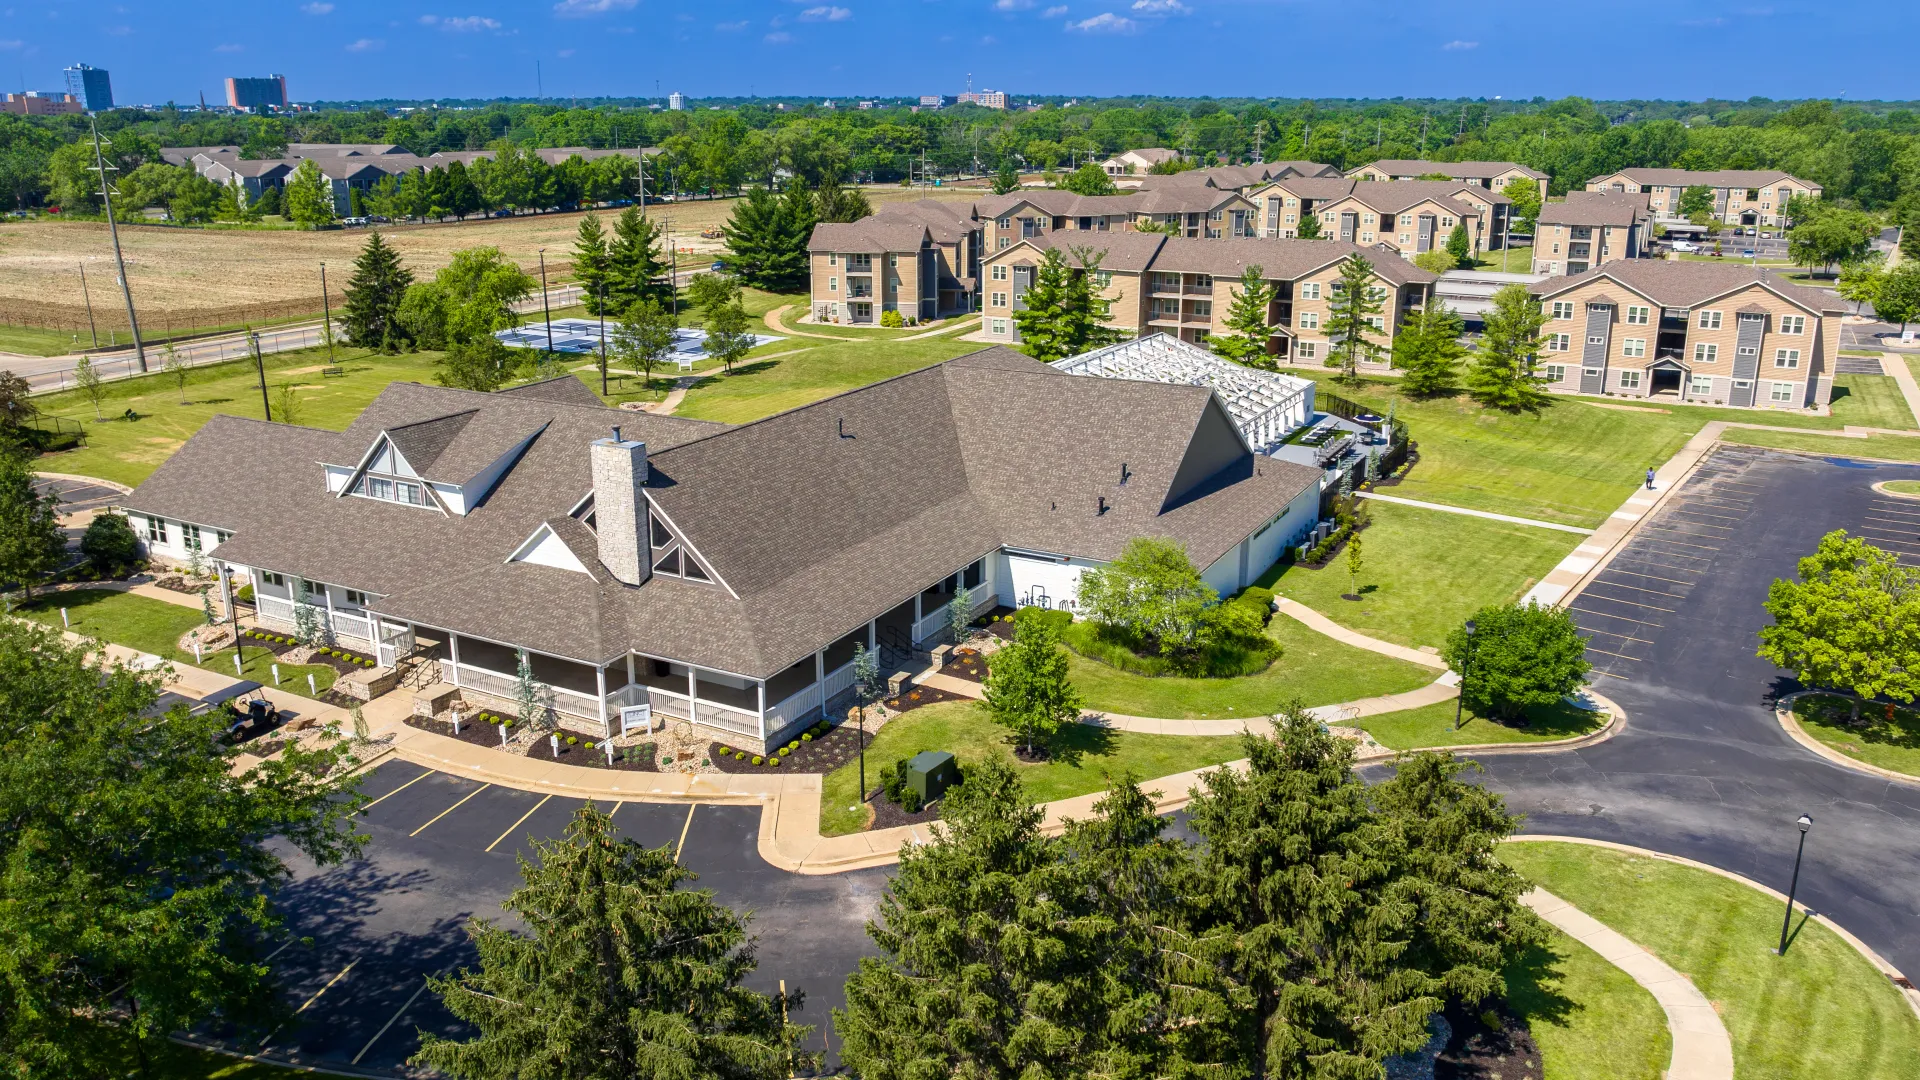 Aerial view of The LINC Apartments community in Urbana, IL, showcasing the expansive green spaces, modern apartment buildings, and central clubhouse with surrounding amenities.